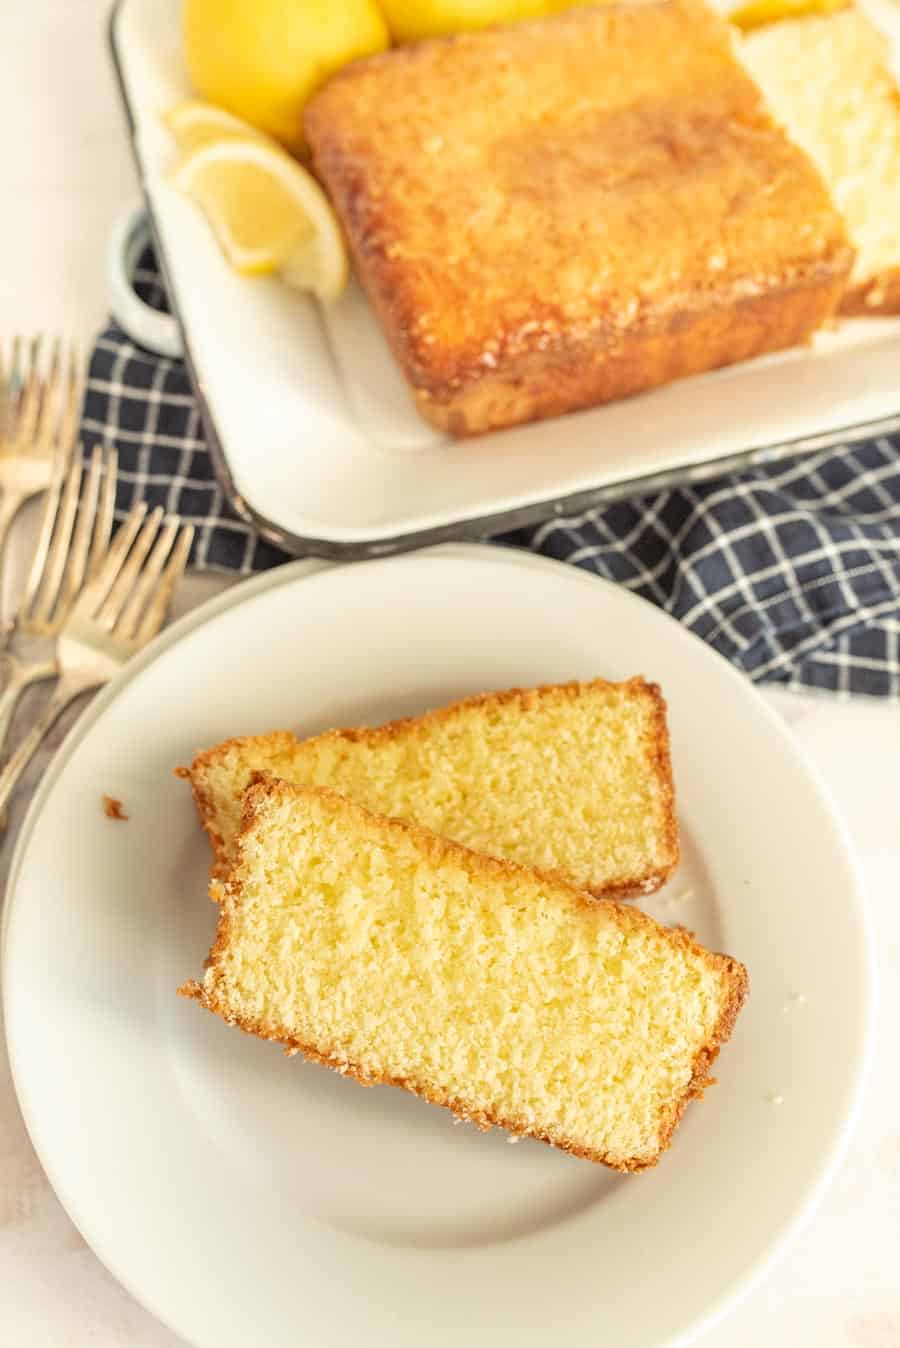 a plate of lemon pound cake slices and a loaf of lemon pound cake in the background